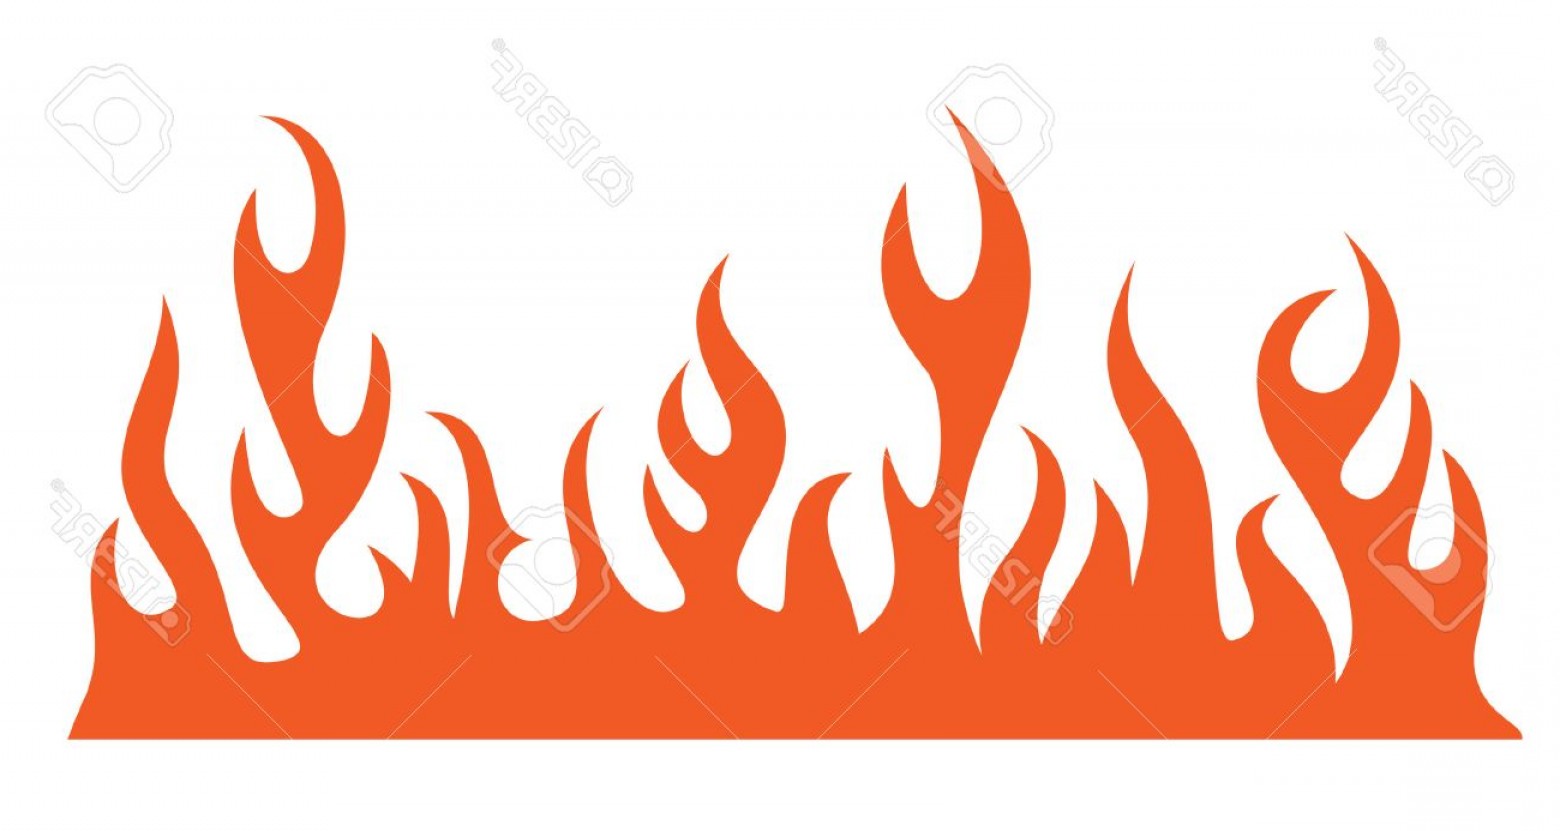 Photosilhouette Of Burning Fire Flame Vector Illustration.